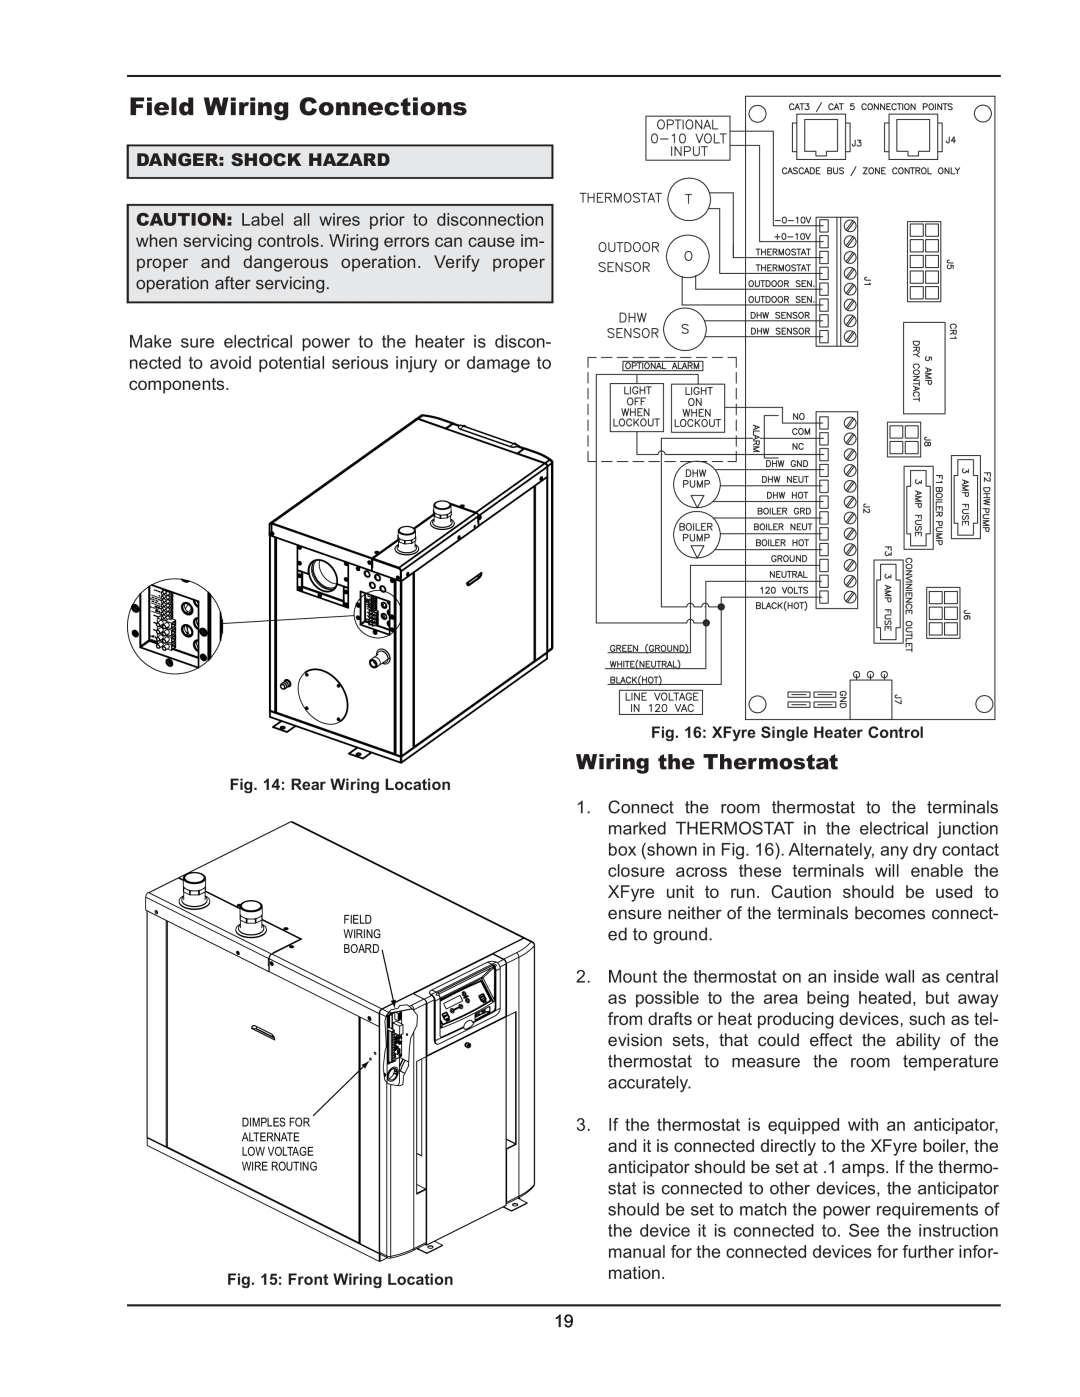 Raypak 300, 850 operating instructions Field Wiring Connections, Wiring the Thermostat 